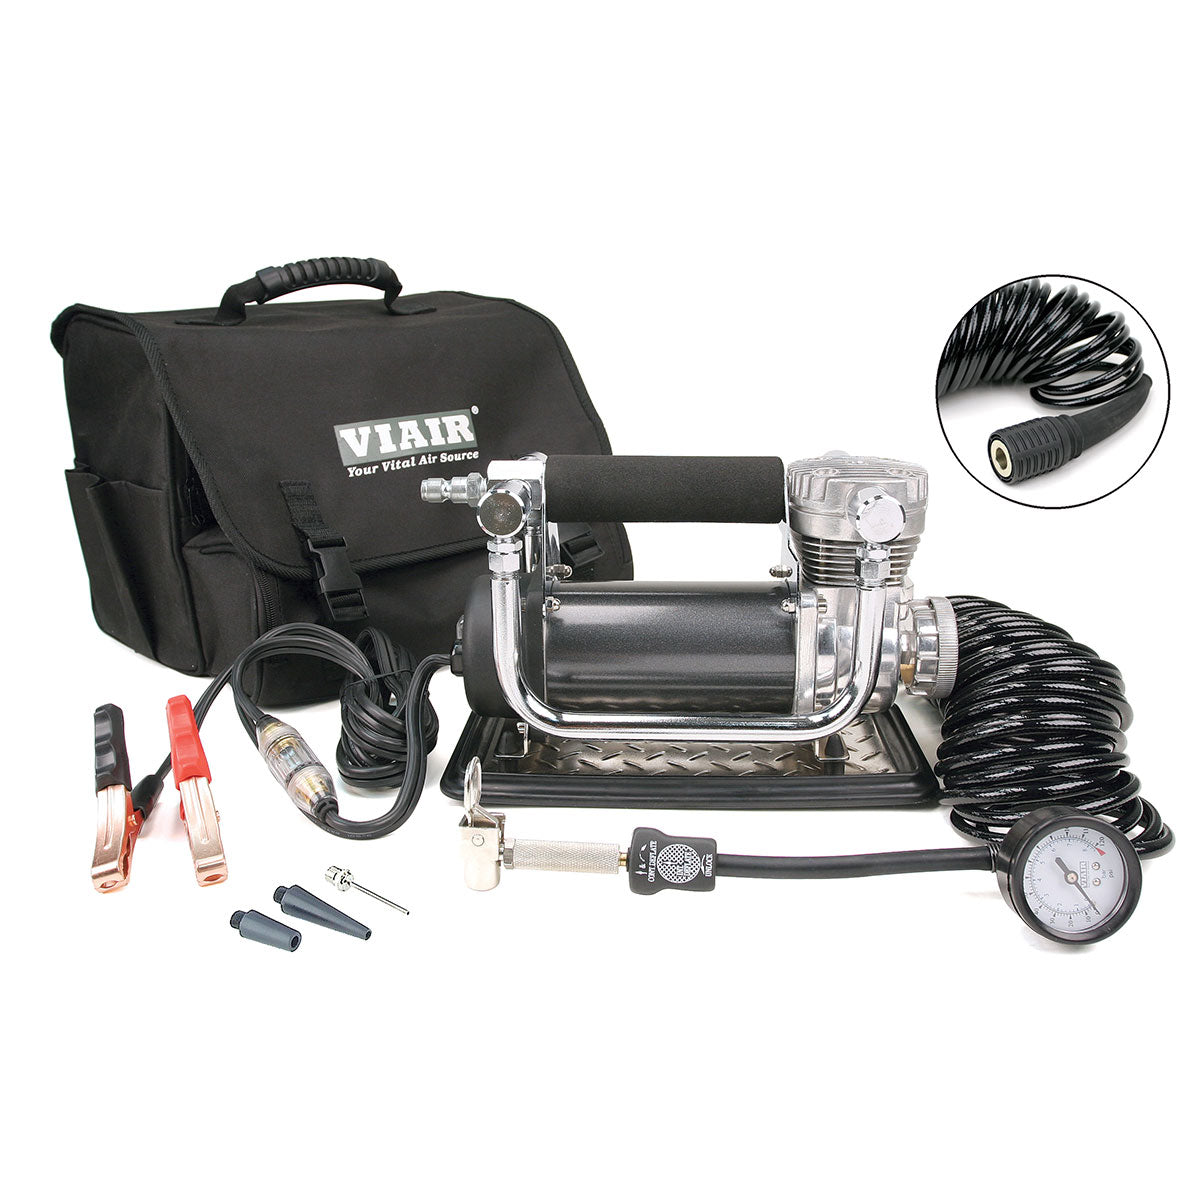 Viair 44043 440P Ultimate Powerful Portable Tire Inflator Kit - Up to 37" Tires